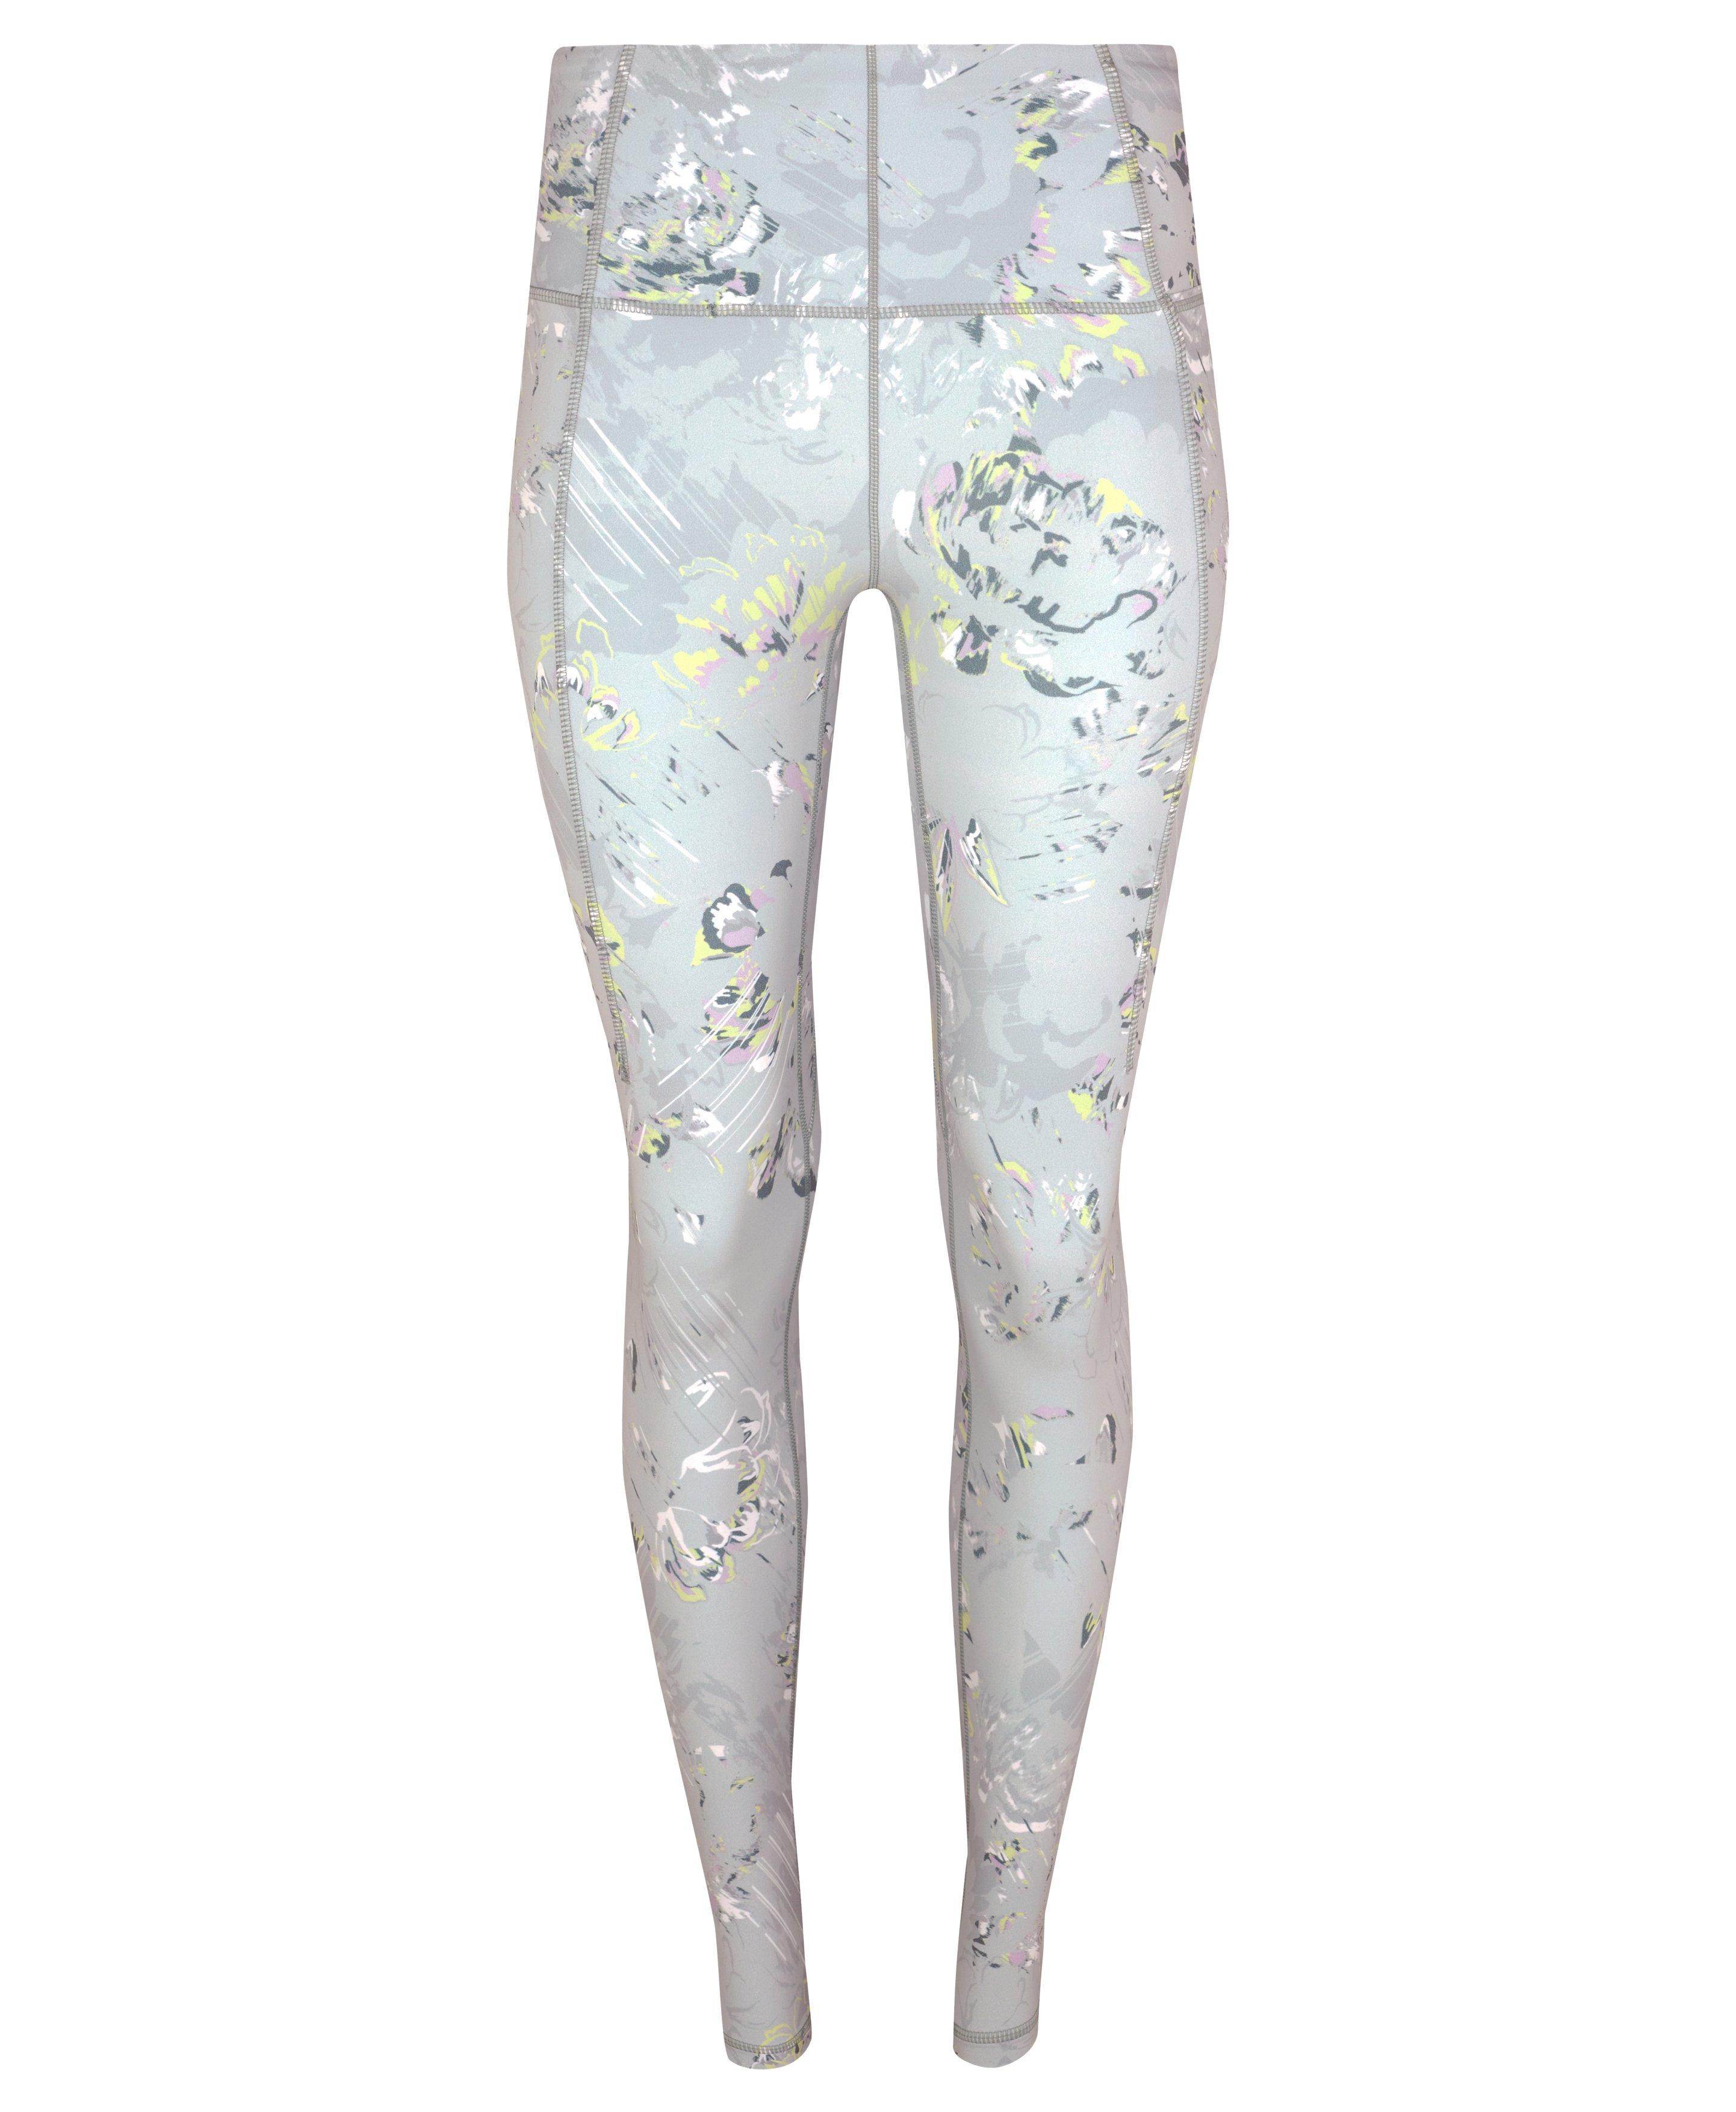 Sexy Dance Women Trousers Cropped Yoga Pants Elastic Waisted Leggings  Breathable Bottoms Floral Print Jeggings Blue XS 